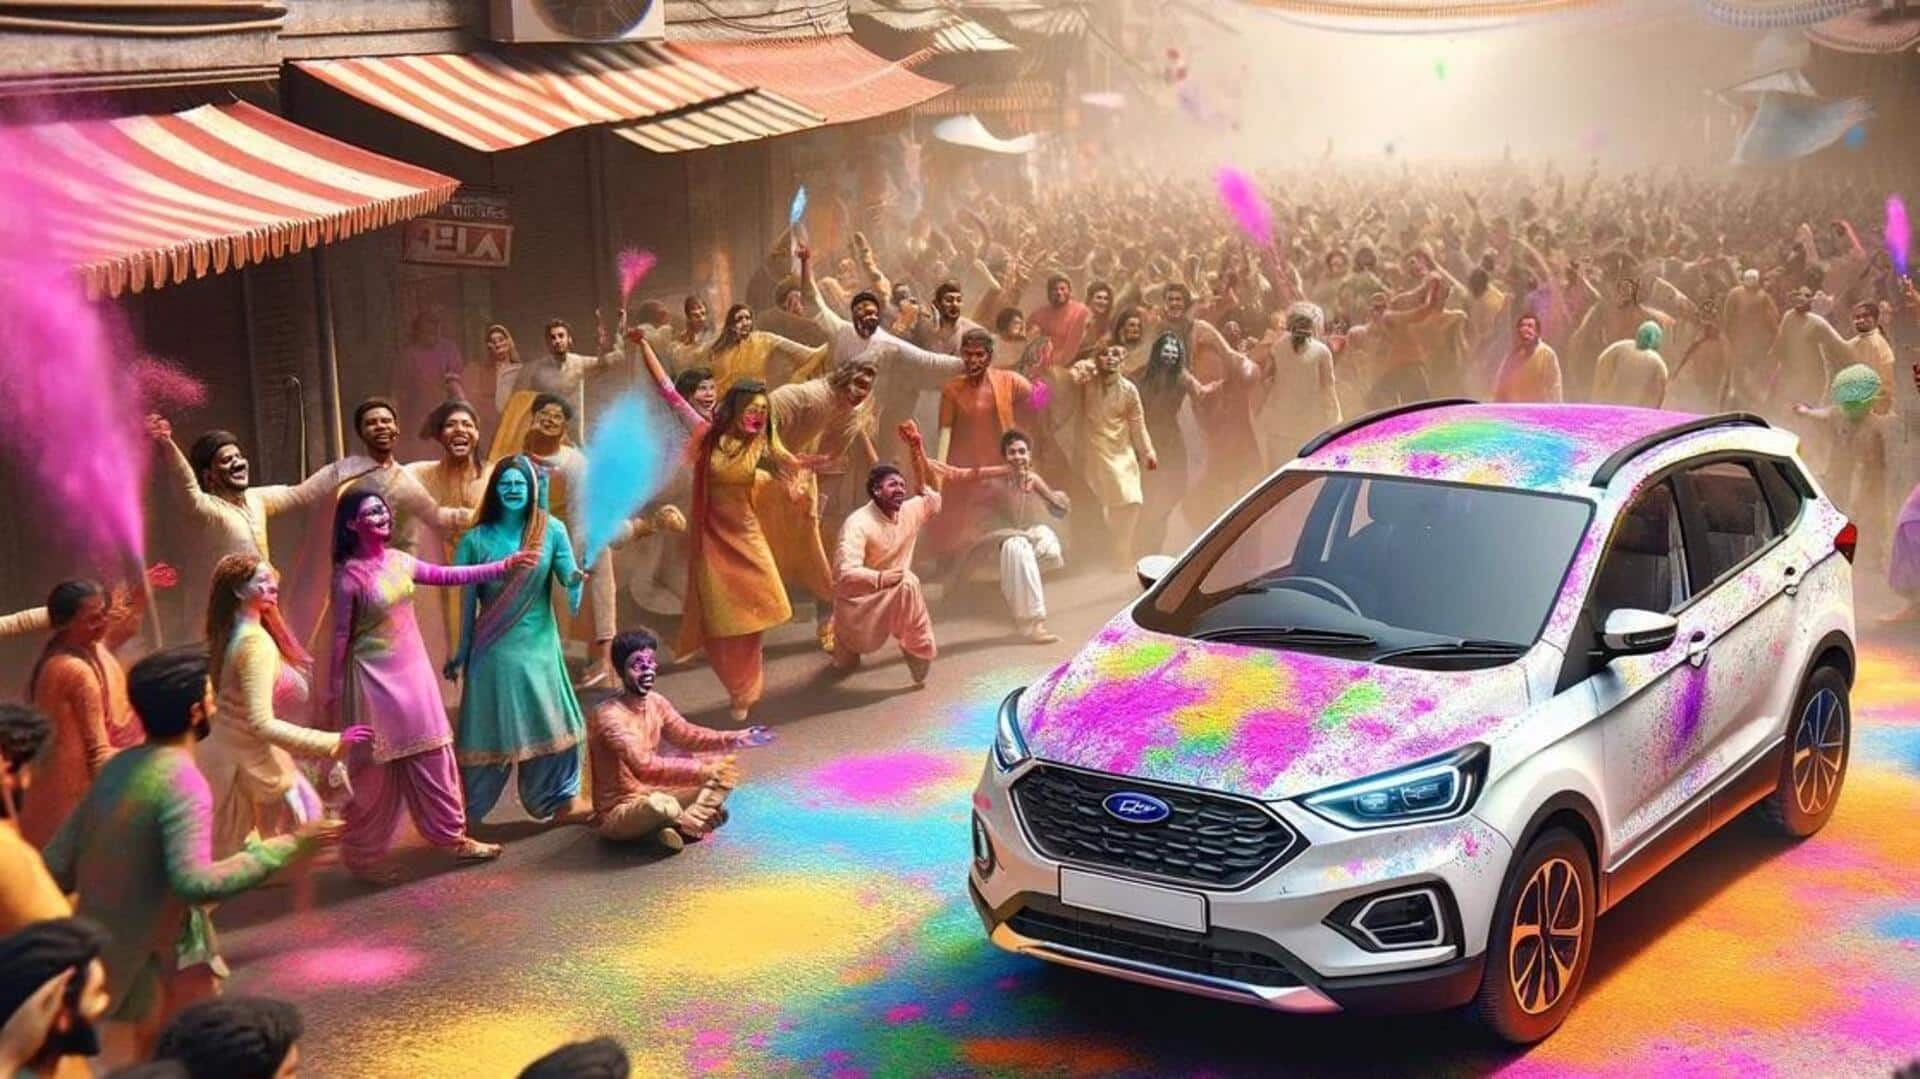 Don't want stains on car this Holi? Take these steps